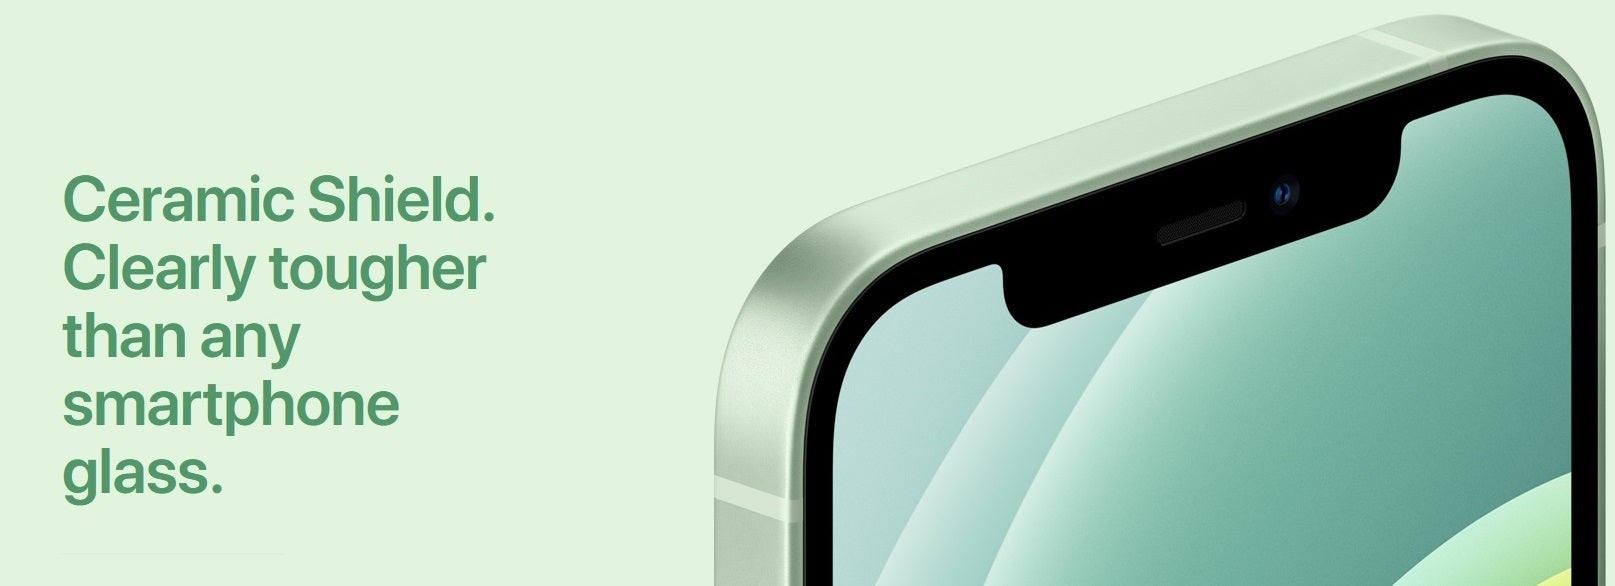 The Ceramic Shield gives an iPhone display a better chance at surviving&amp;nbsp; a drop without a crack or scratch - Some analysts and consumers call this the most important addition to the 2020 iPhones instead of 5G